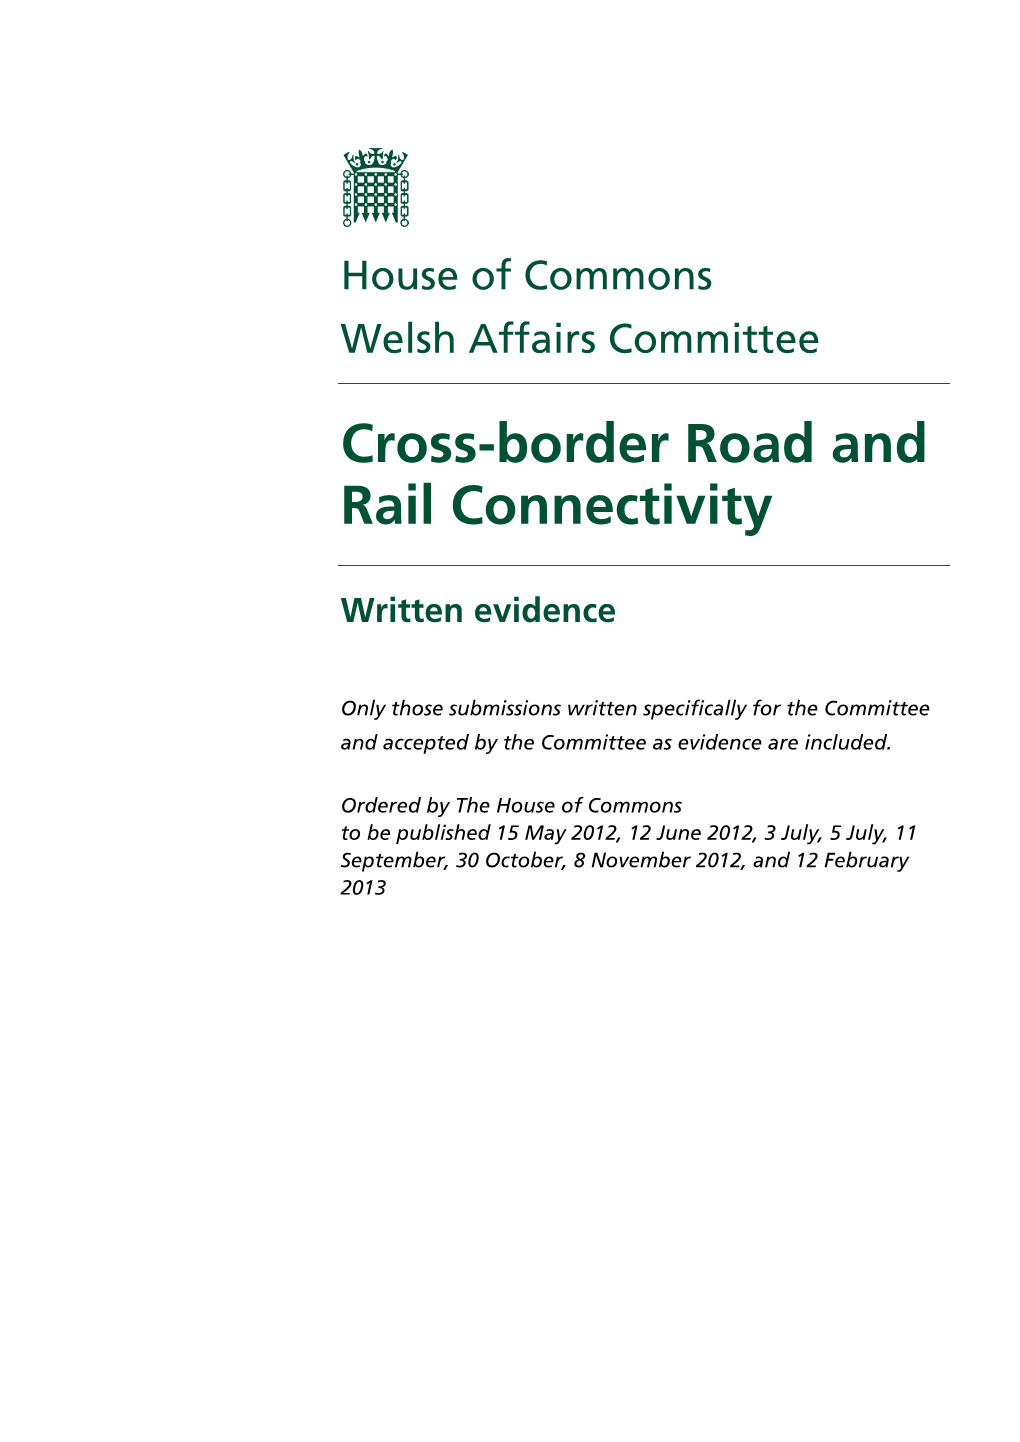 Cross-Border Road and Rail Connectivity